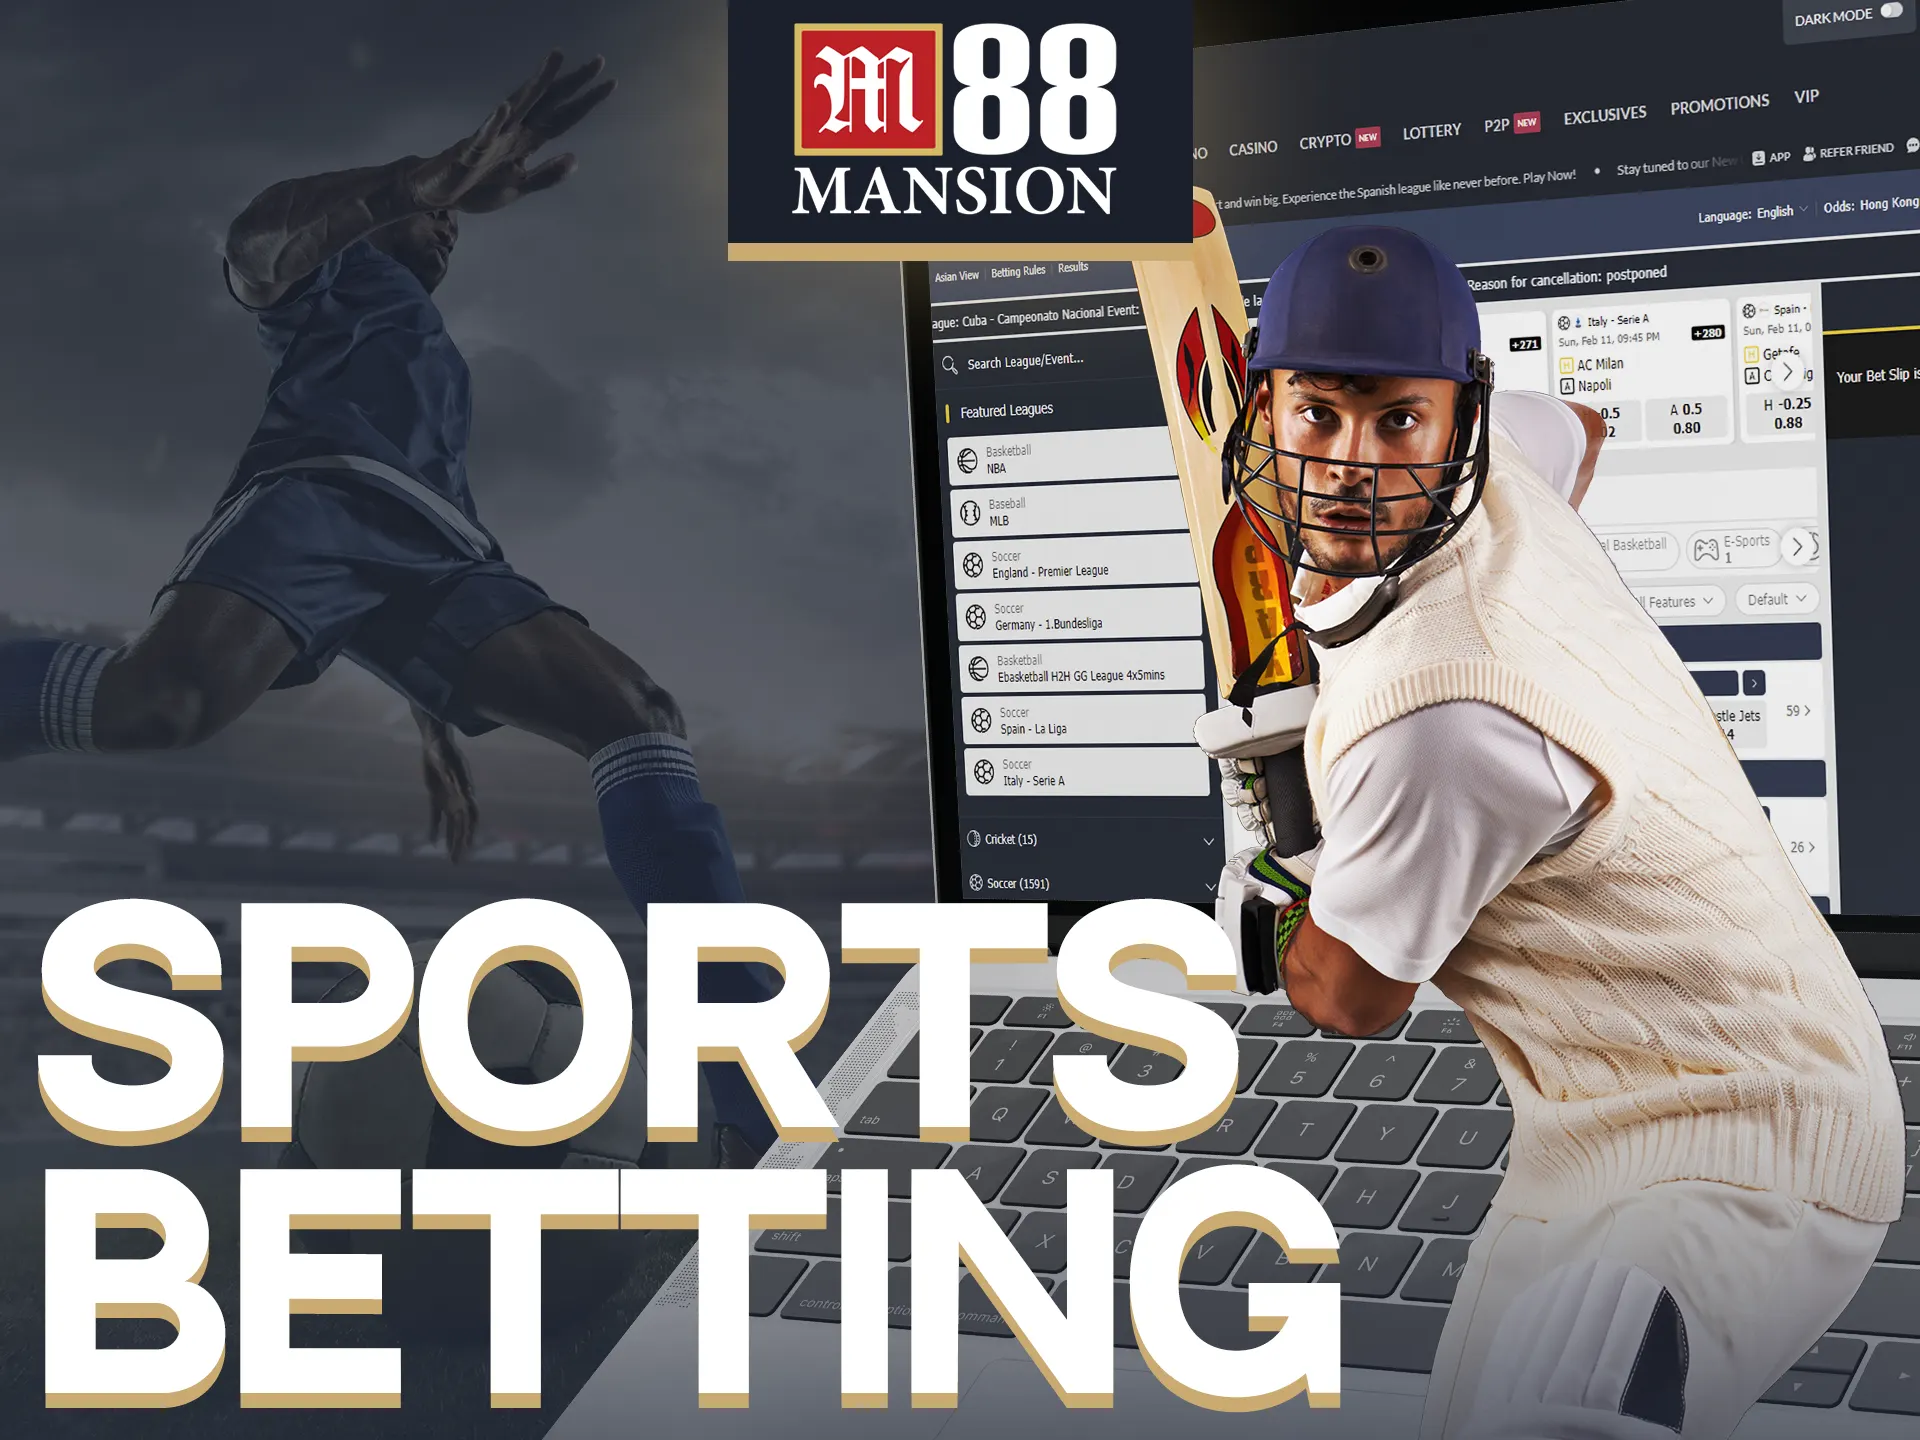 M88 offers diverse sports betting options, including esports.